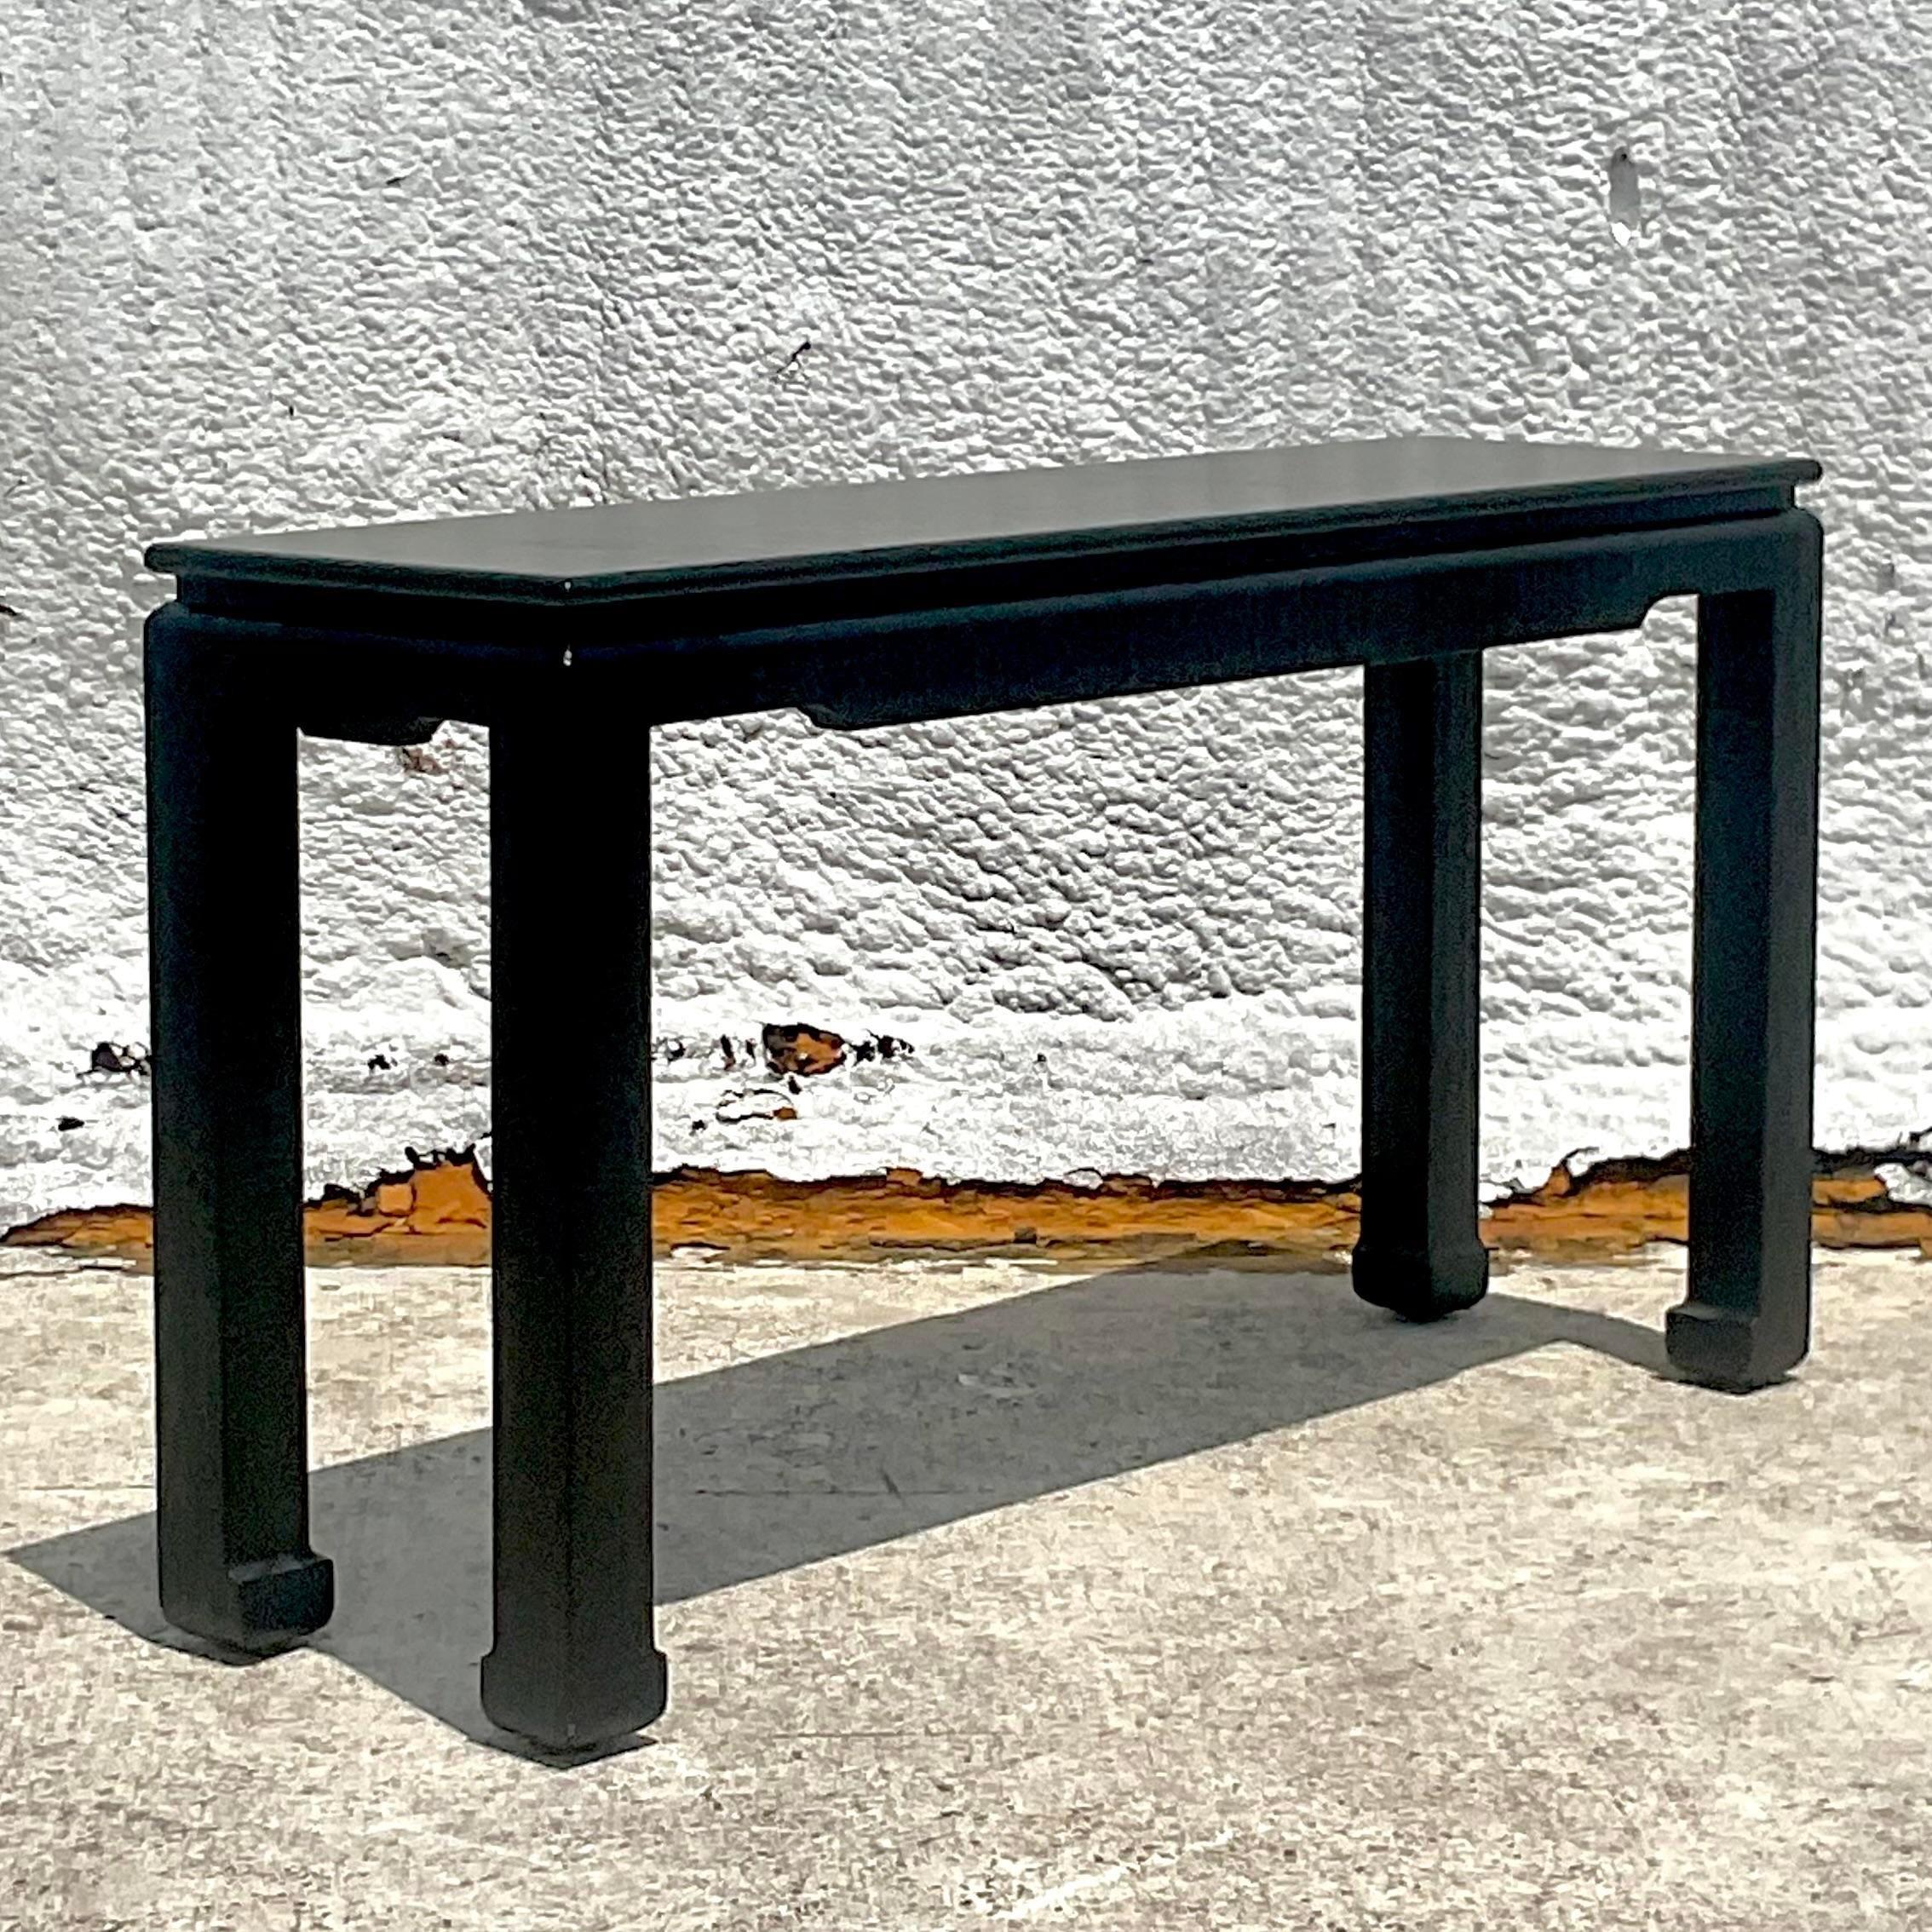 A fabulous vintage Regency console table. A chic Grasscloth finish with Ming legs. Currently black, but easy to change the color to suit your project. Acquired from a Palm Beach estate.